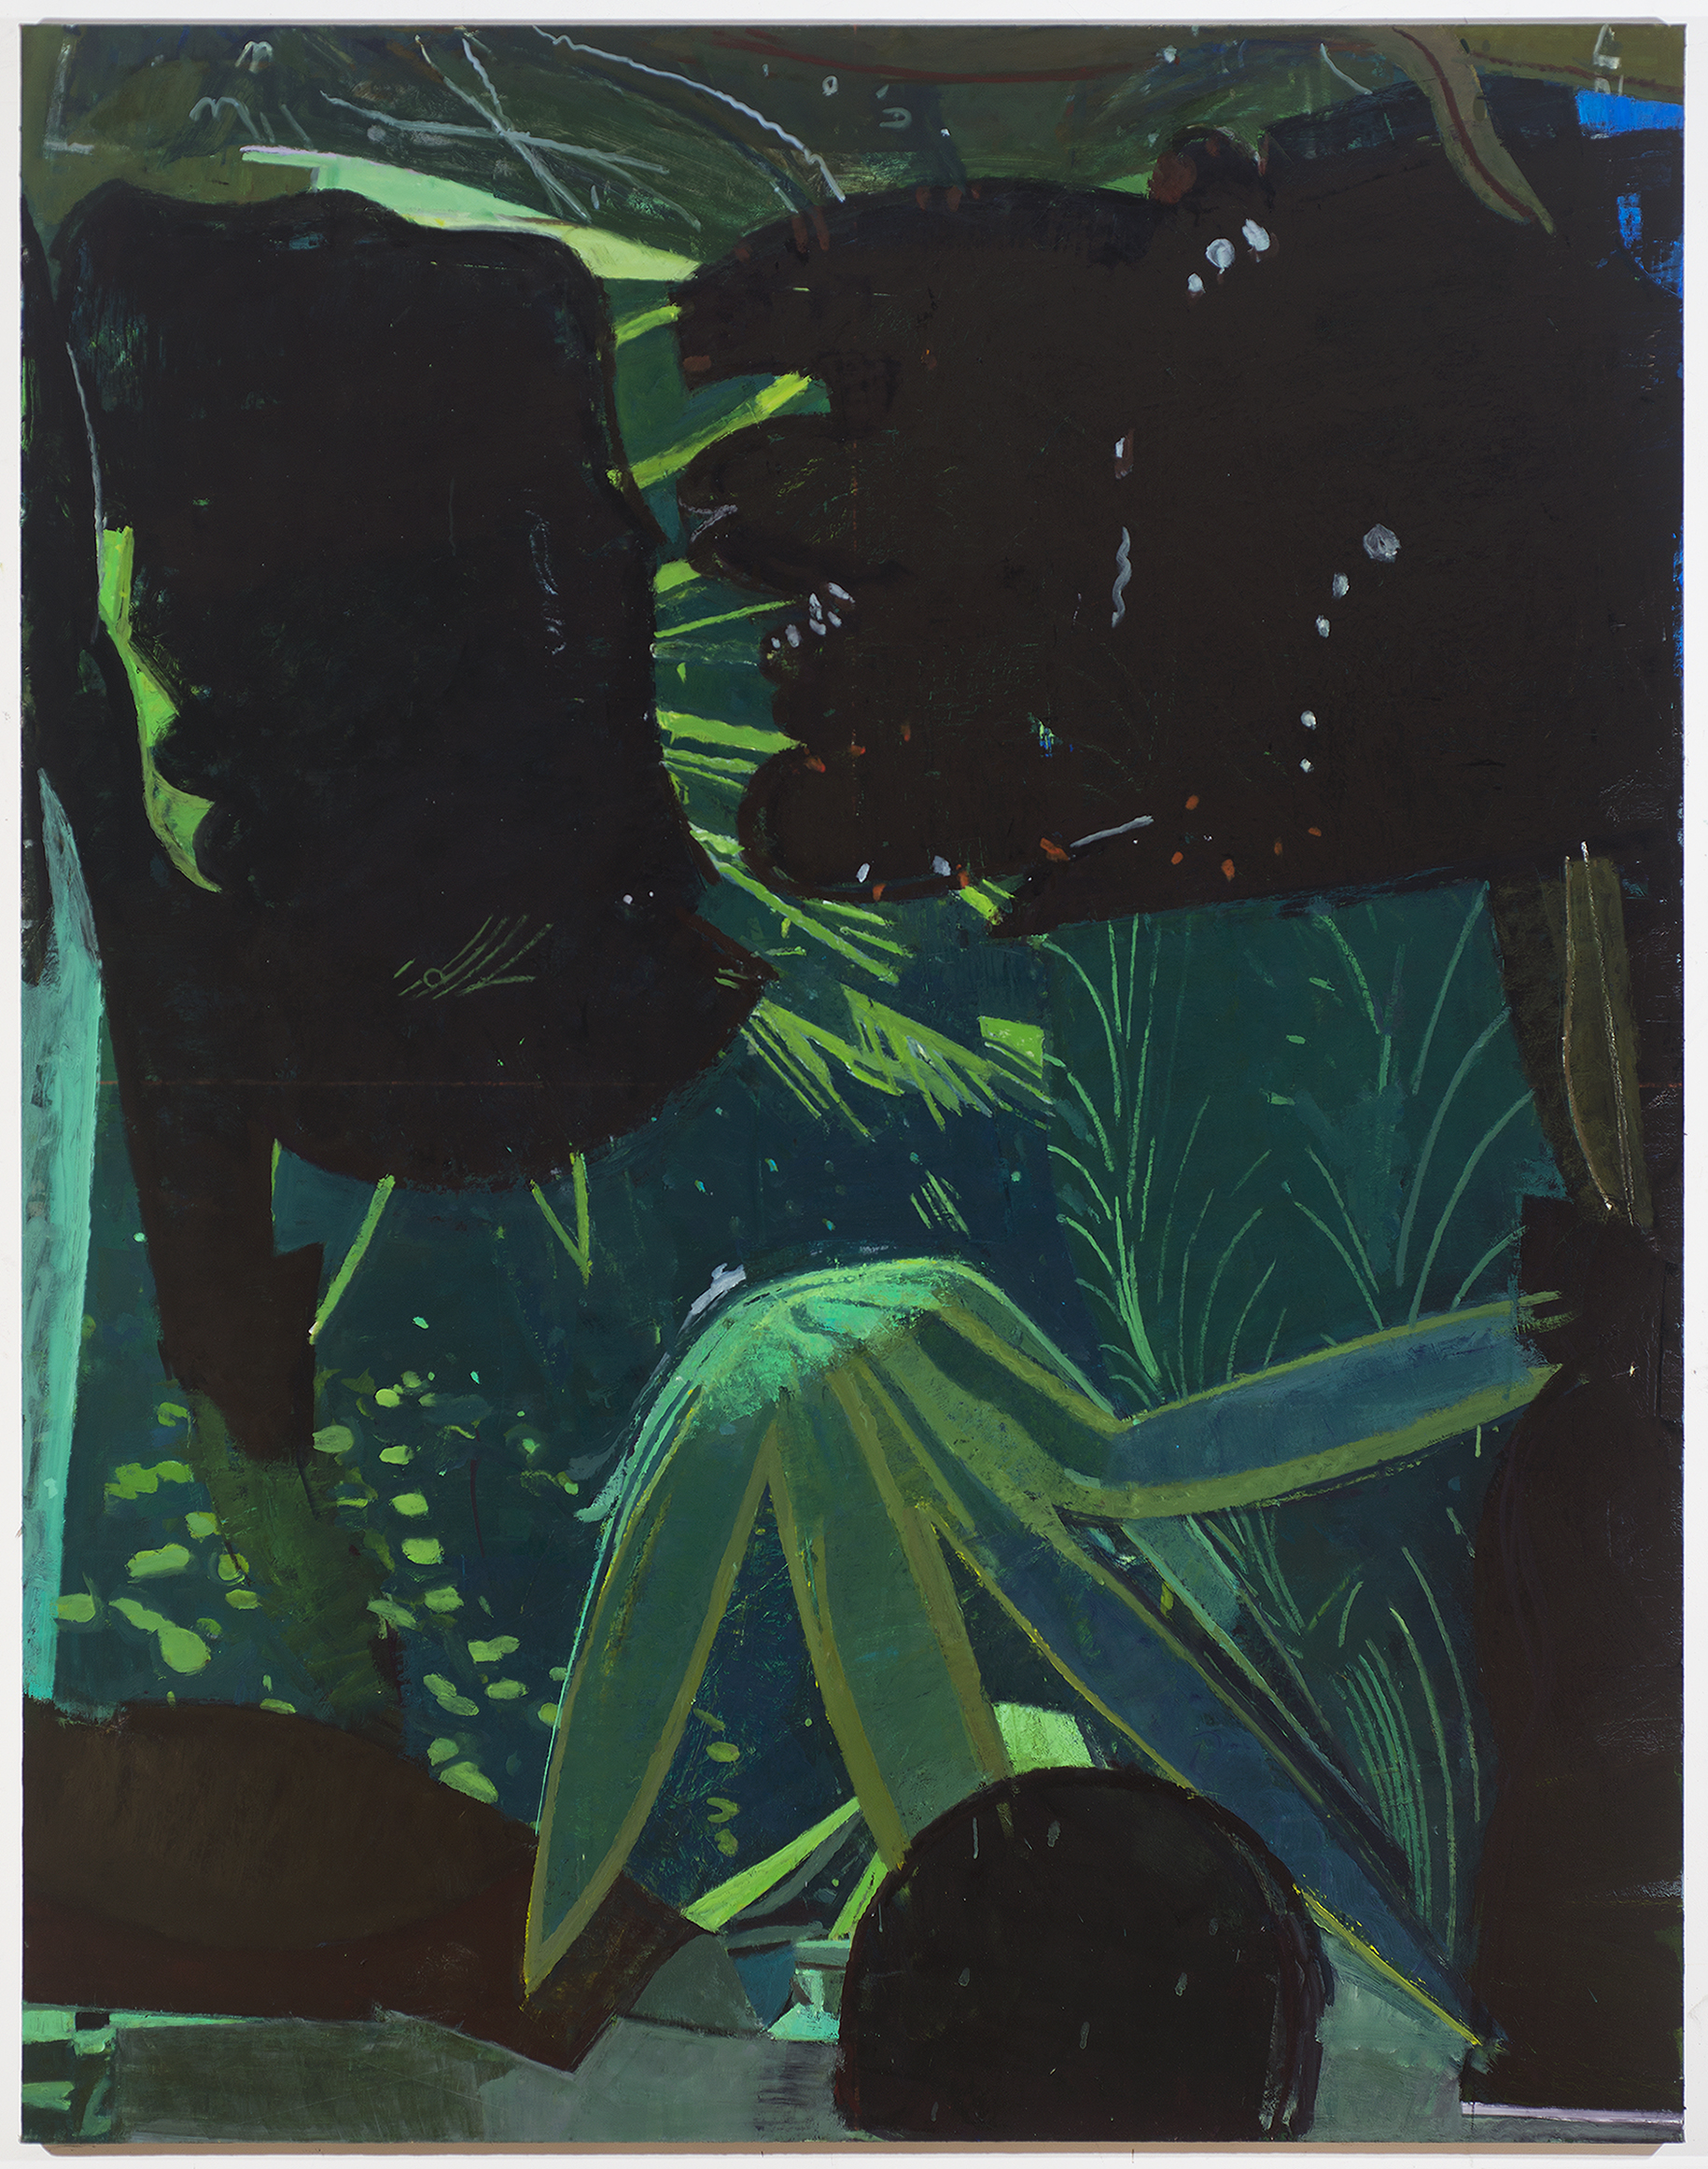   underwater electric greenhouse , 2014 oil on linen 84 x 66 in  promised to the collection of National Academy of Design     &nbsp; 